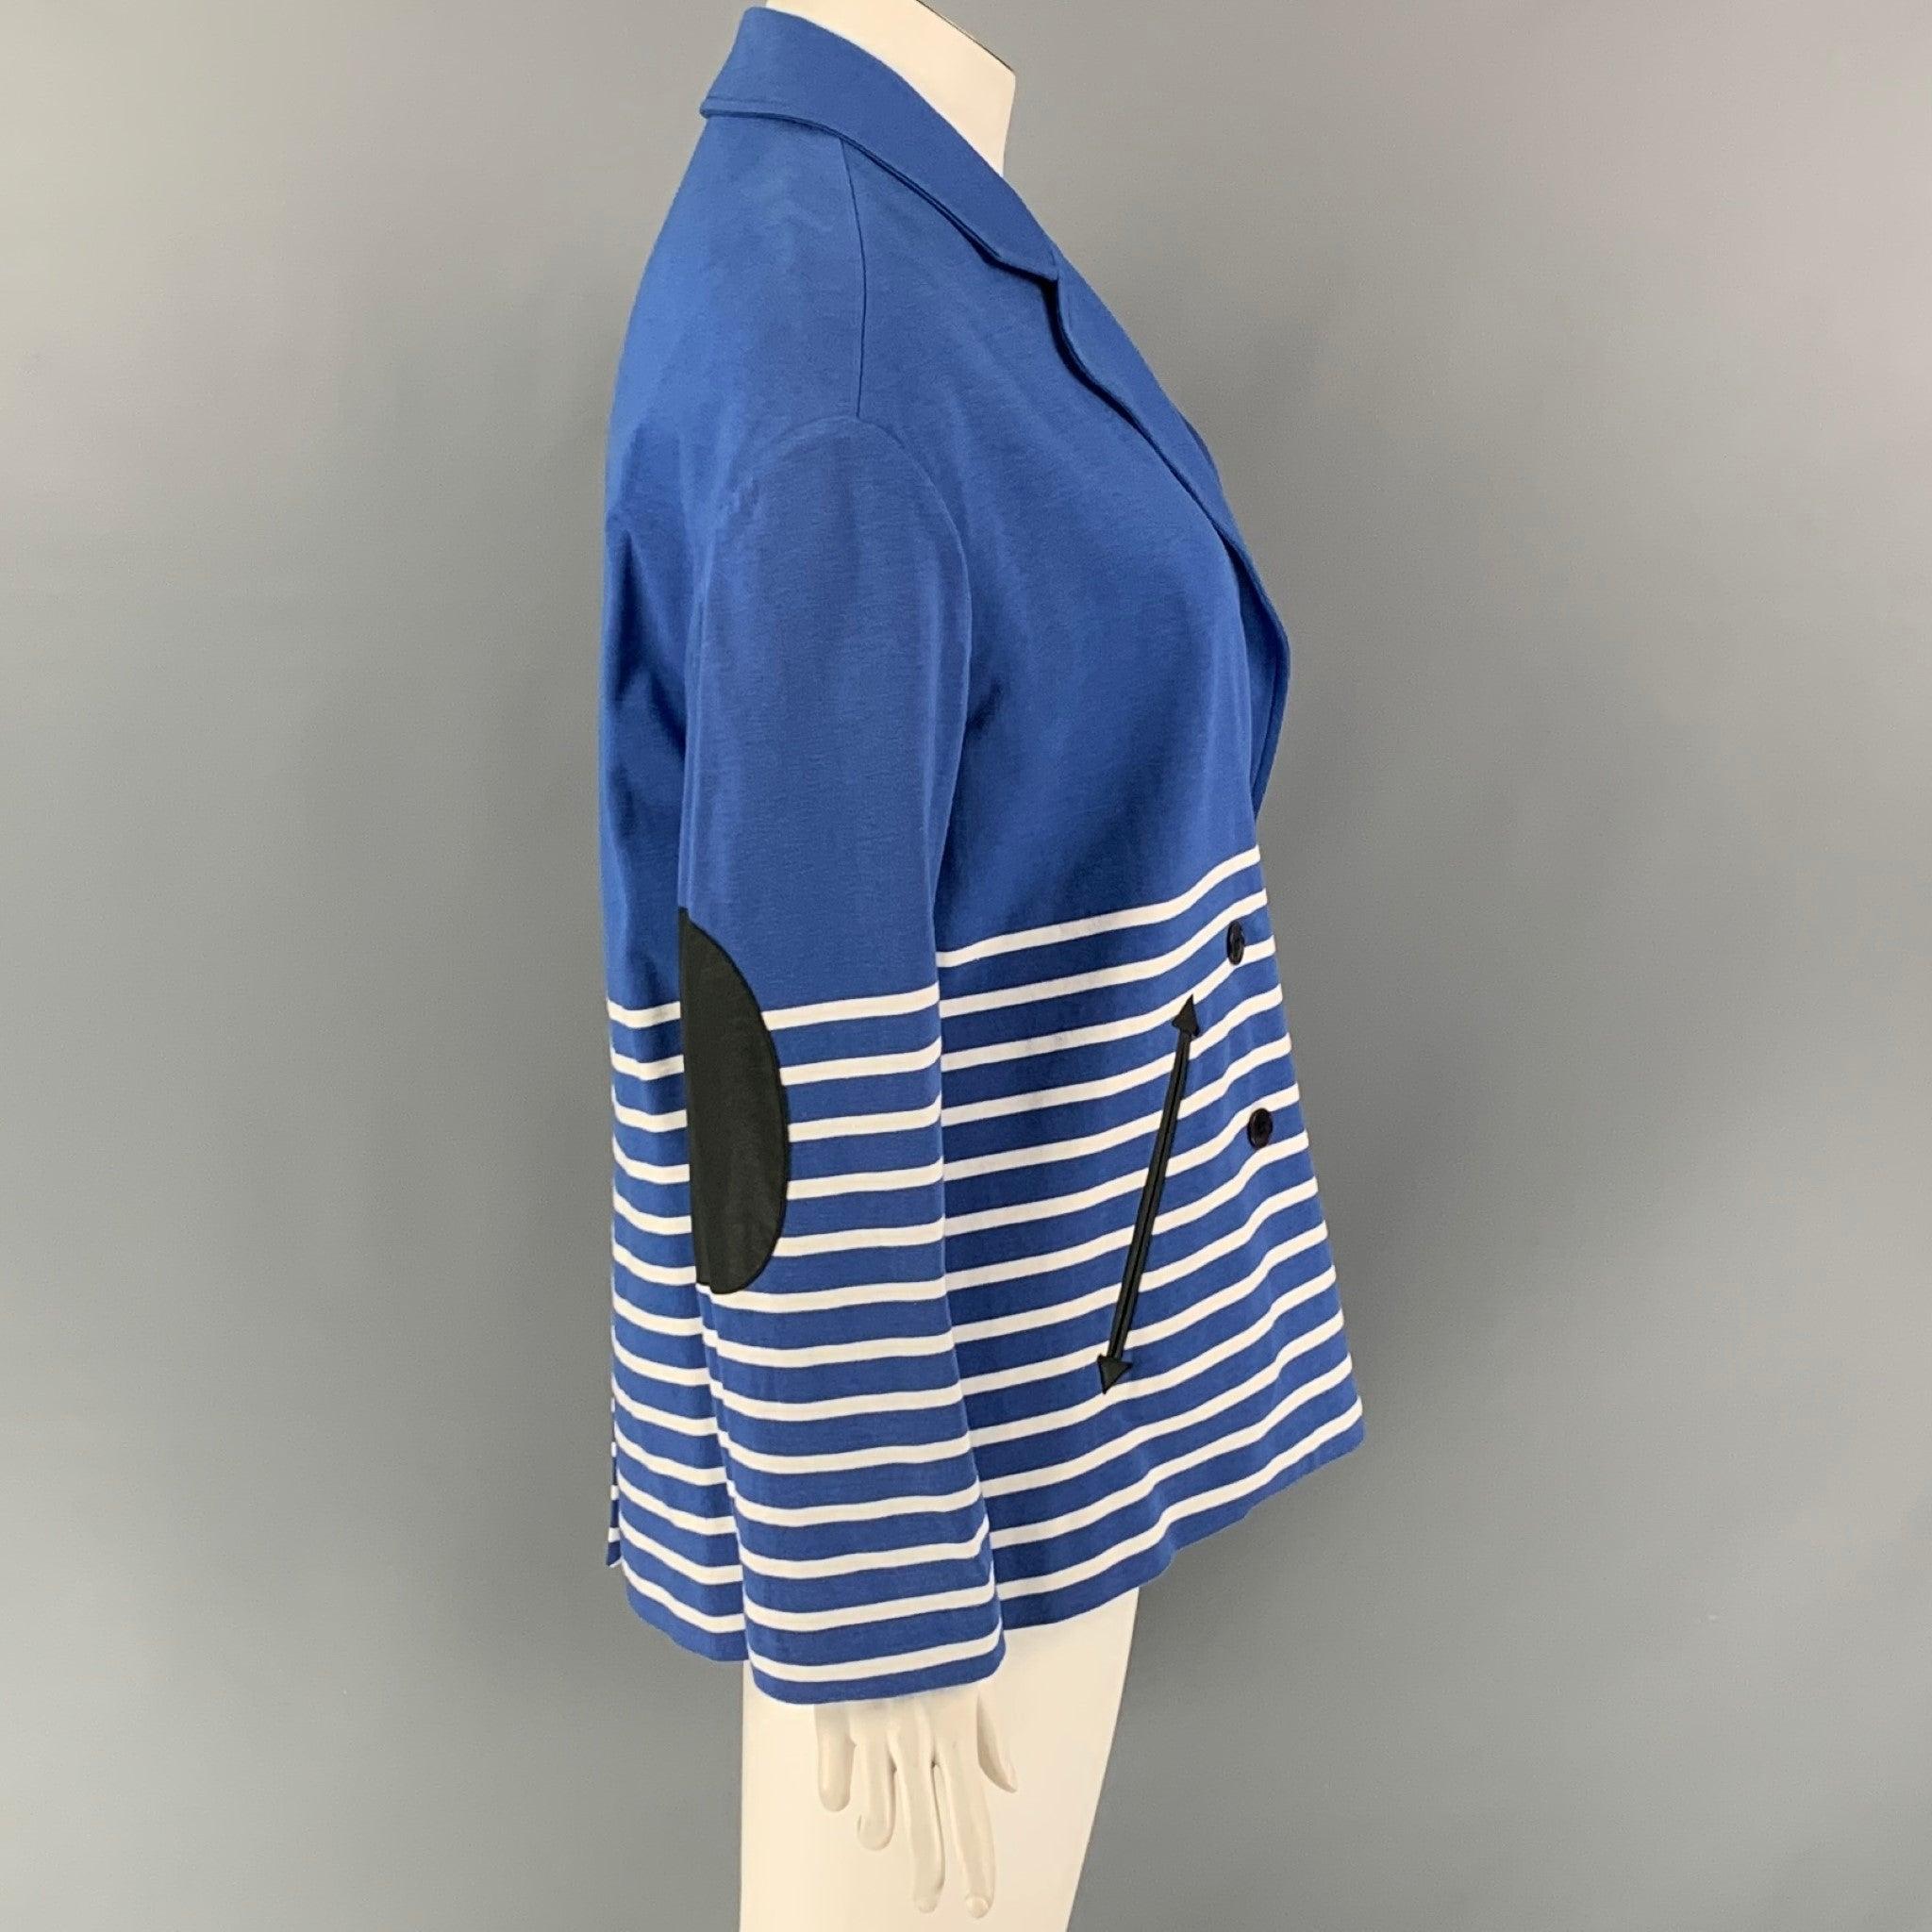 BAND OF OUTSIDERS jacket comes in a blue & white stripe cotton featuring a notch lapel, oversized fit, leather elbow patches, single back vent, and a double breasted closure. Made in Italy.Very Good
Pre-Owned Condition. 

Marked:   3 

Measurements: